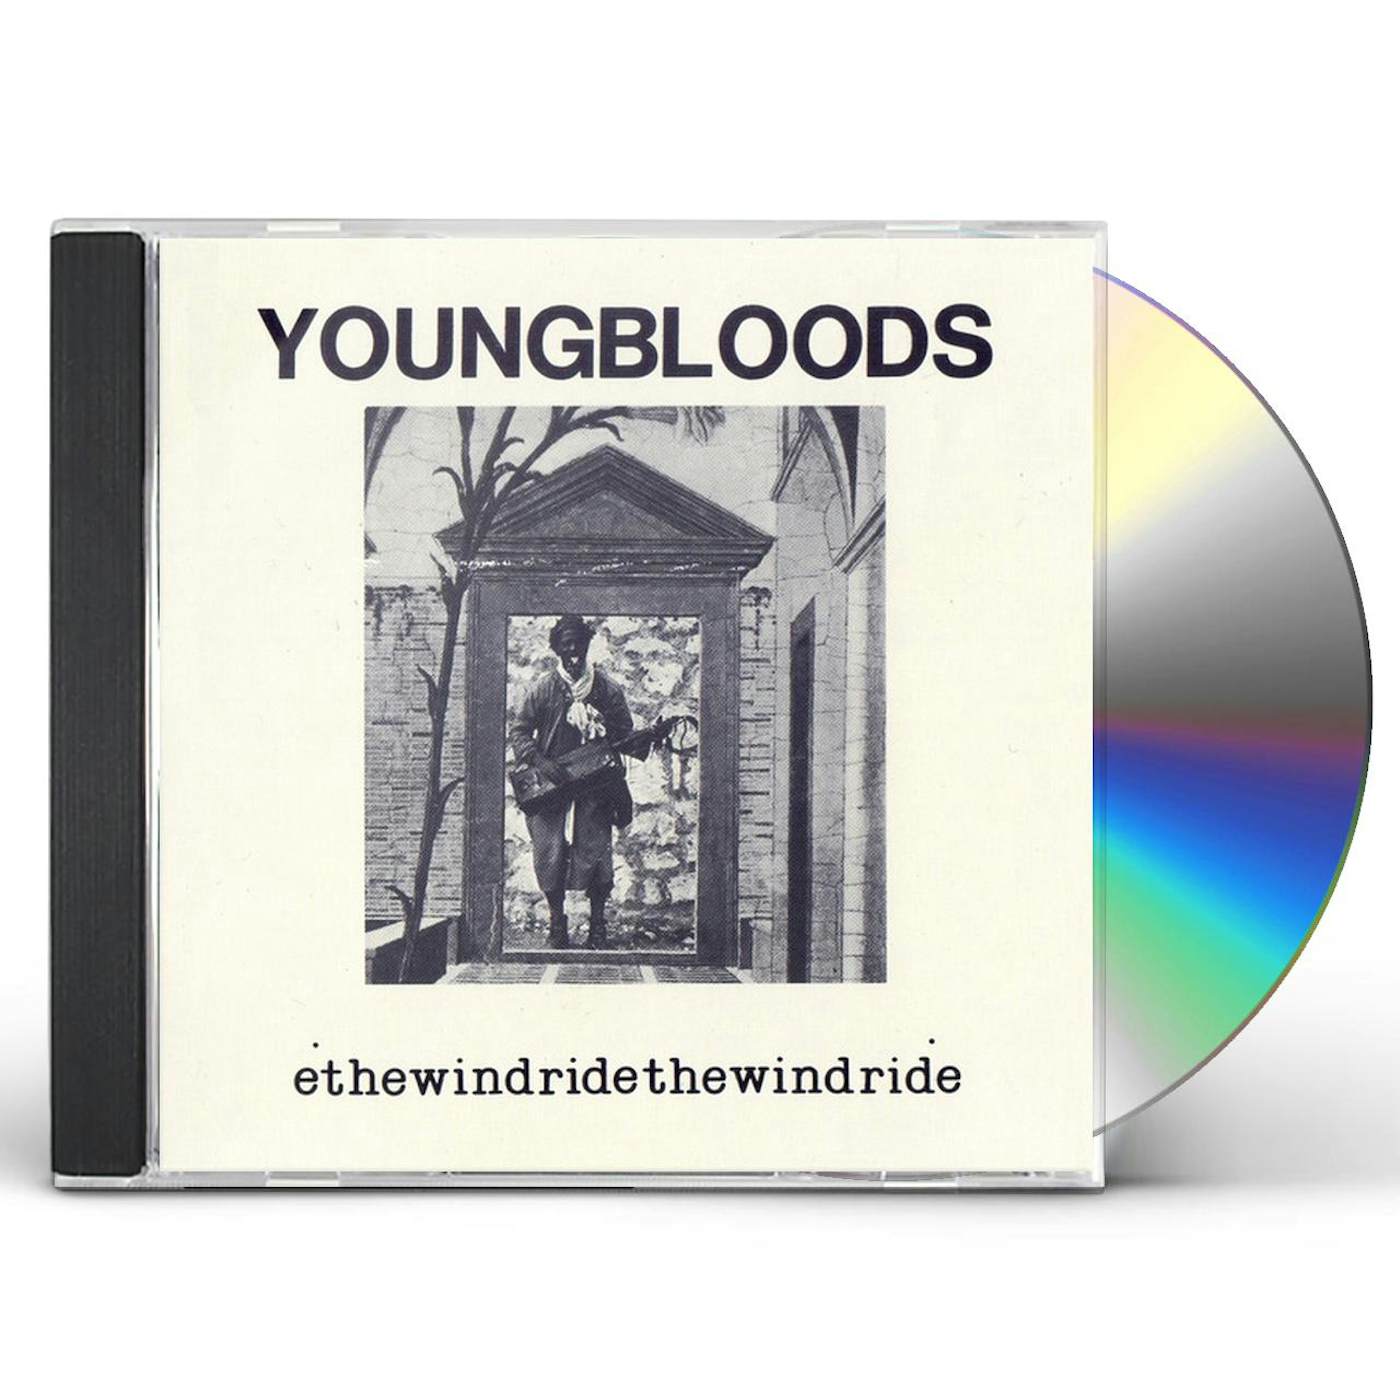 The Youngbloods RIDE THE WIND CD